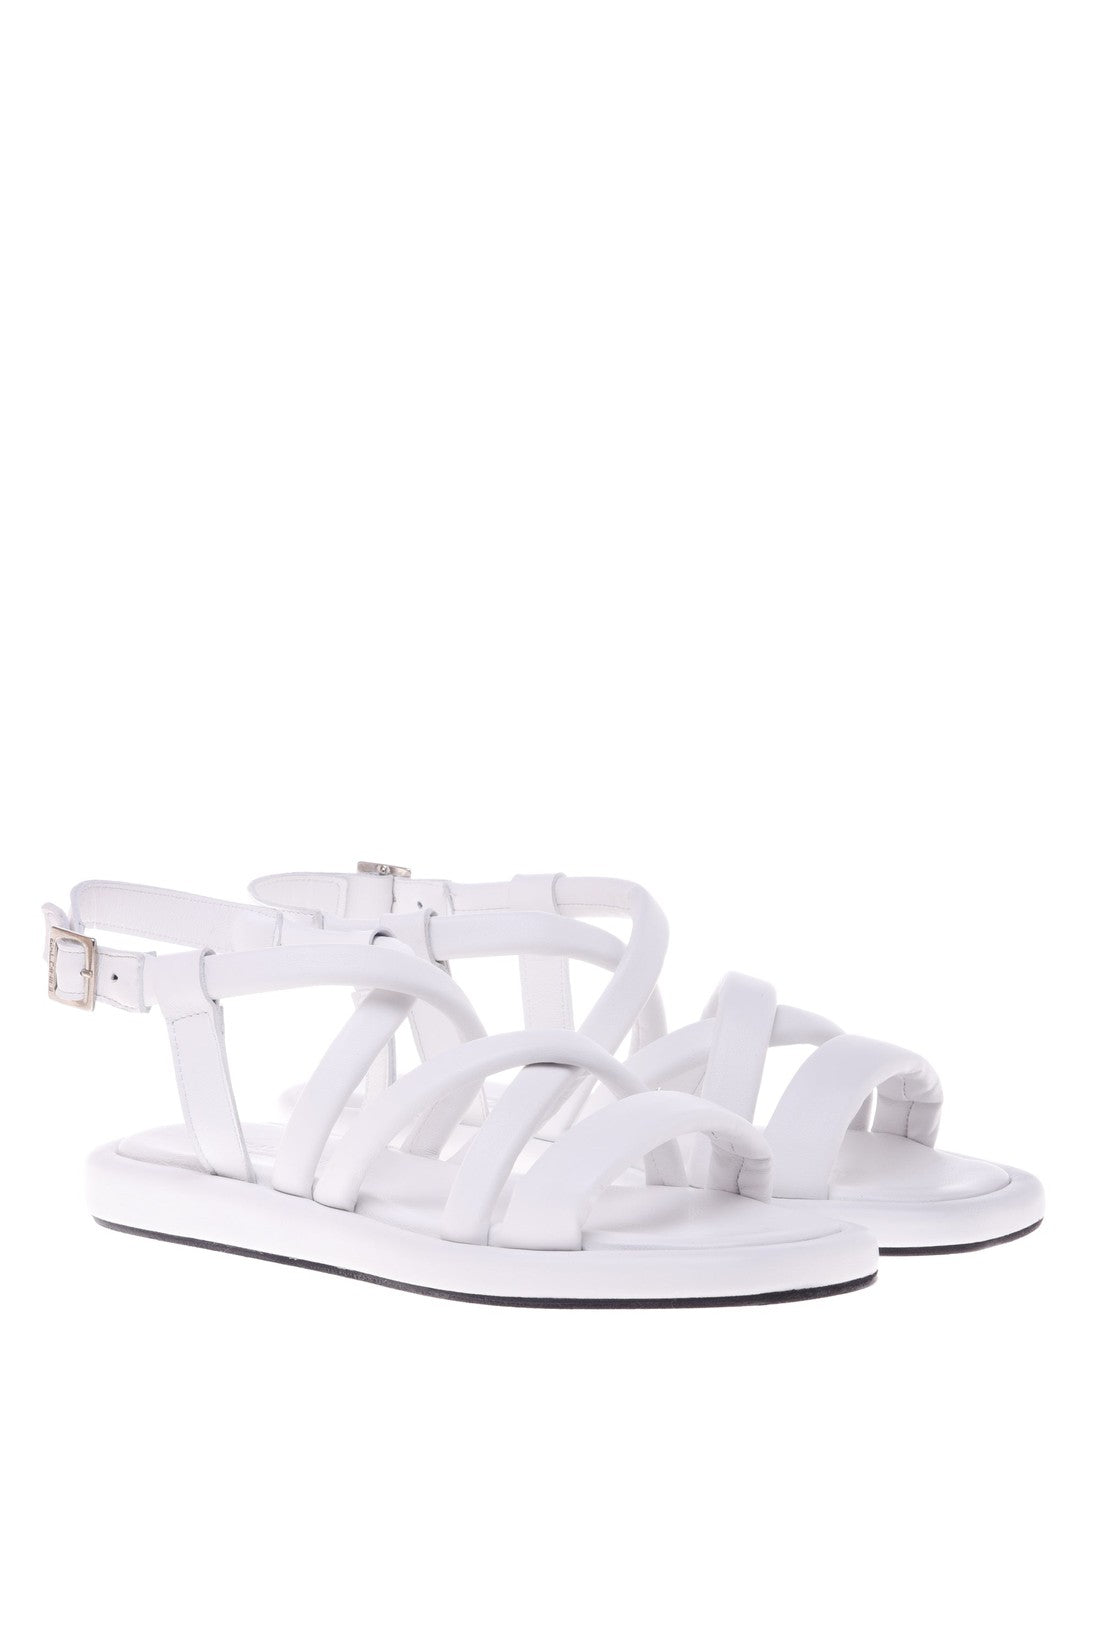 BALDININI-OUTLET-SALE-Sandal-in-white-nappa-leather-Sandalen-ARCHIVE-COLLECTION-3.jpg